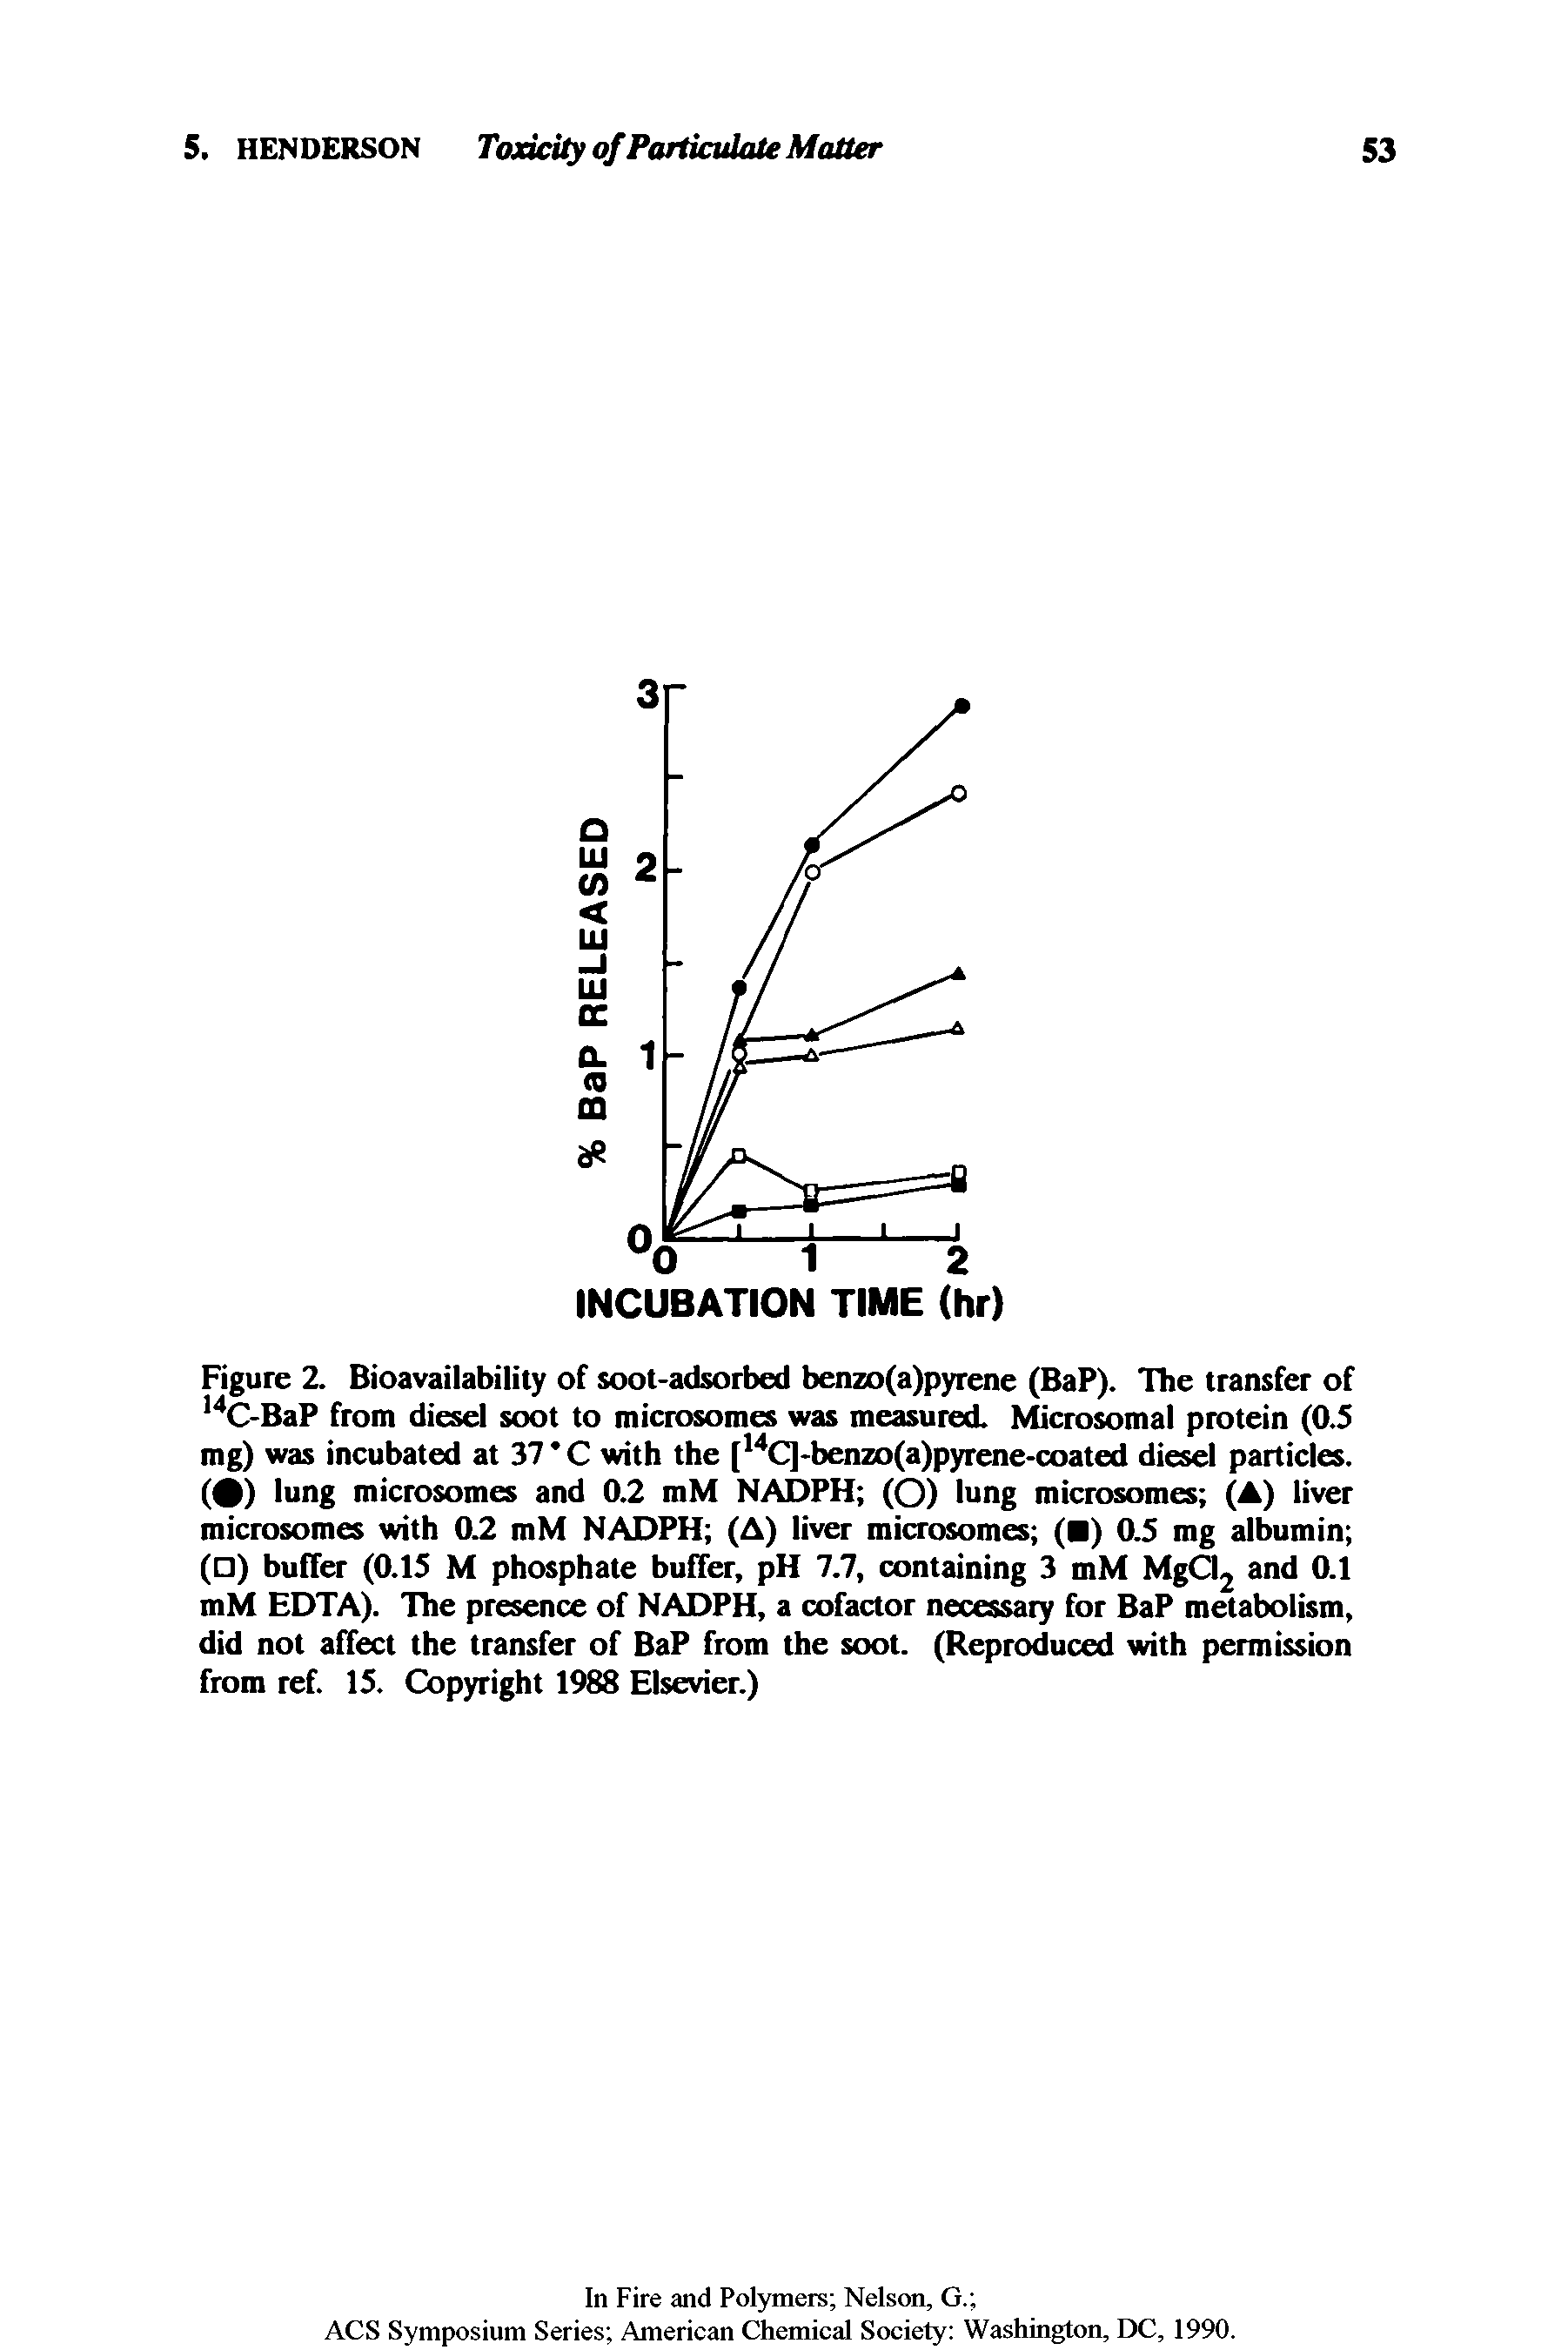 Figure 2. Bioavailability of soot-adsorbed benzo(a)pyrene (BaP). The transfer of l4C-BaP from diesel soot to microsomes was measured. Microsomal protein (0.5 mg) was incubated at 37 C with the [14C]-benzo(a)pyrene-coated diesel particles. ( ) lung microsomes and 0.2 mM NADPH (O) lung microsomes (A) liver microsomes with 0.2 mM NADPH (A) liver microsomes ( ) 0.5 mg albumin ( ) buffer (0.15 M phosphate buffer, pH 7.7, containing 3 mM MgCI2 and 0.1 mM EDTA). The presence of NADPH, a cofactor necessary for BaP metabolism, did not affect the transfer of BaP from the soot. (Reproduced with permission from ref. 15. Copyright 1988 Elsevier.)...